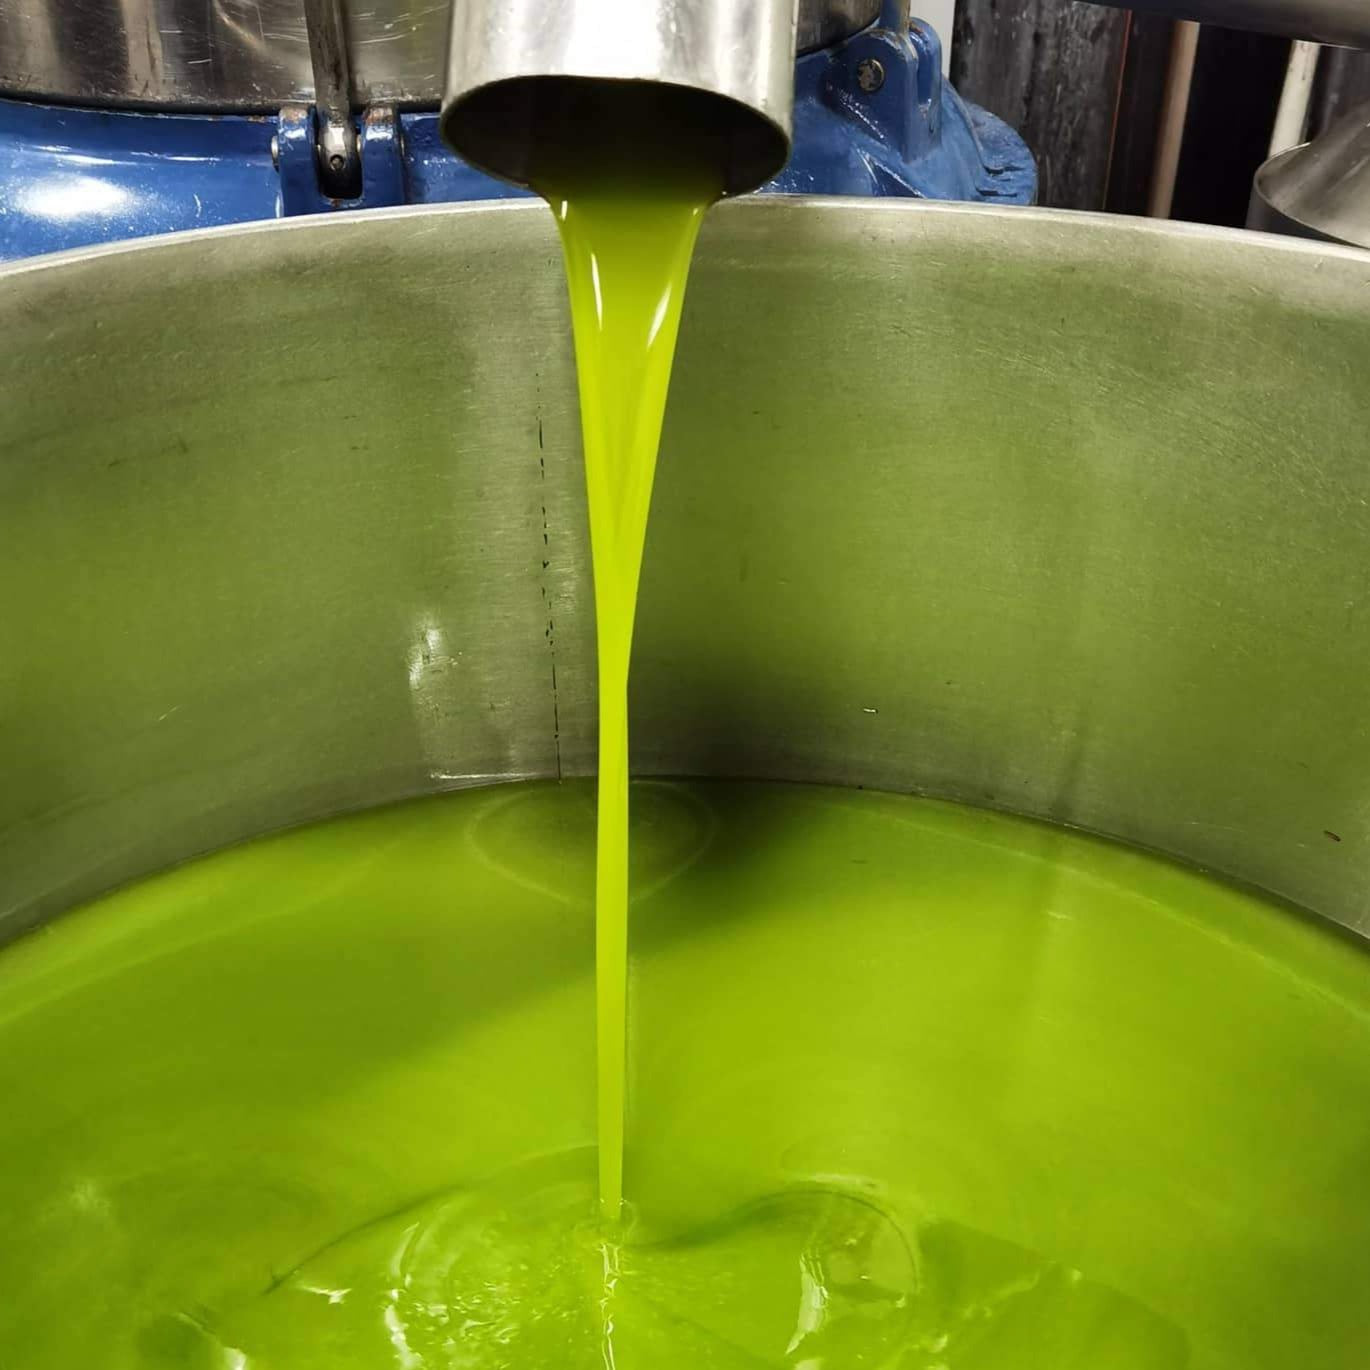 Olio Nuovo - the fresh, bright green olive oil coming right out of the press.